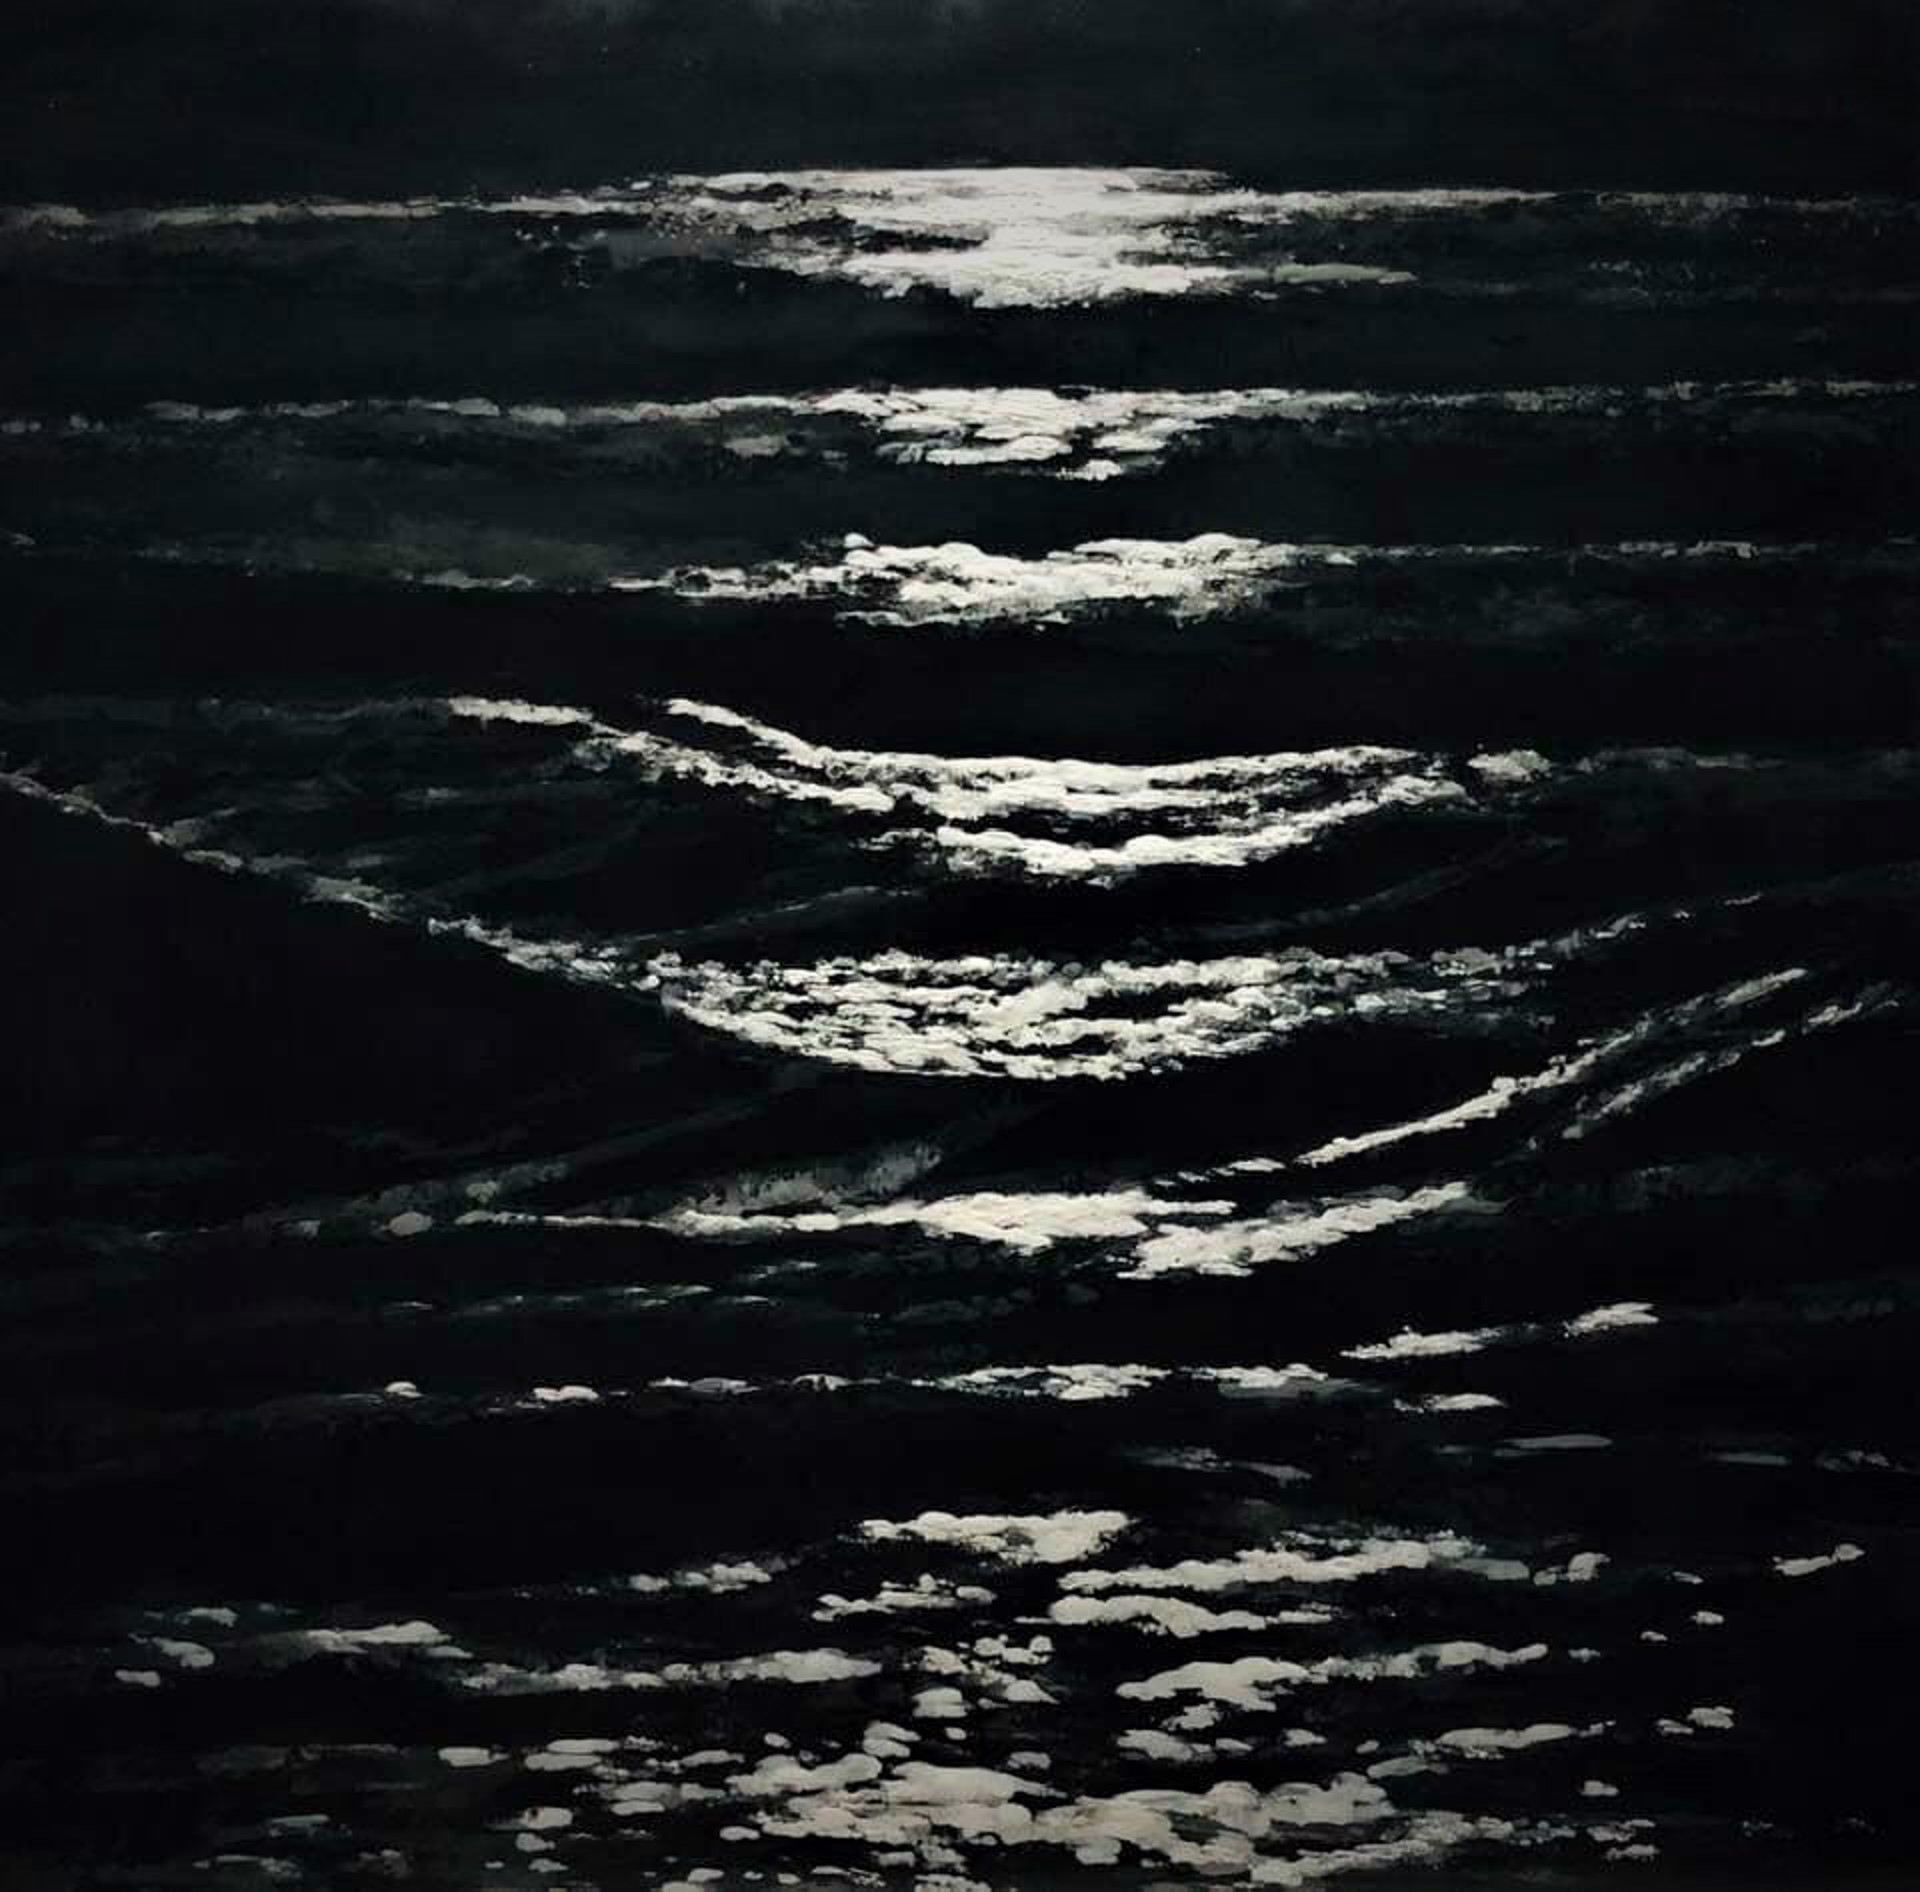 Moonlight Reflection and Waves by Bob Fesser